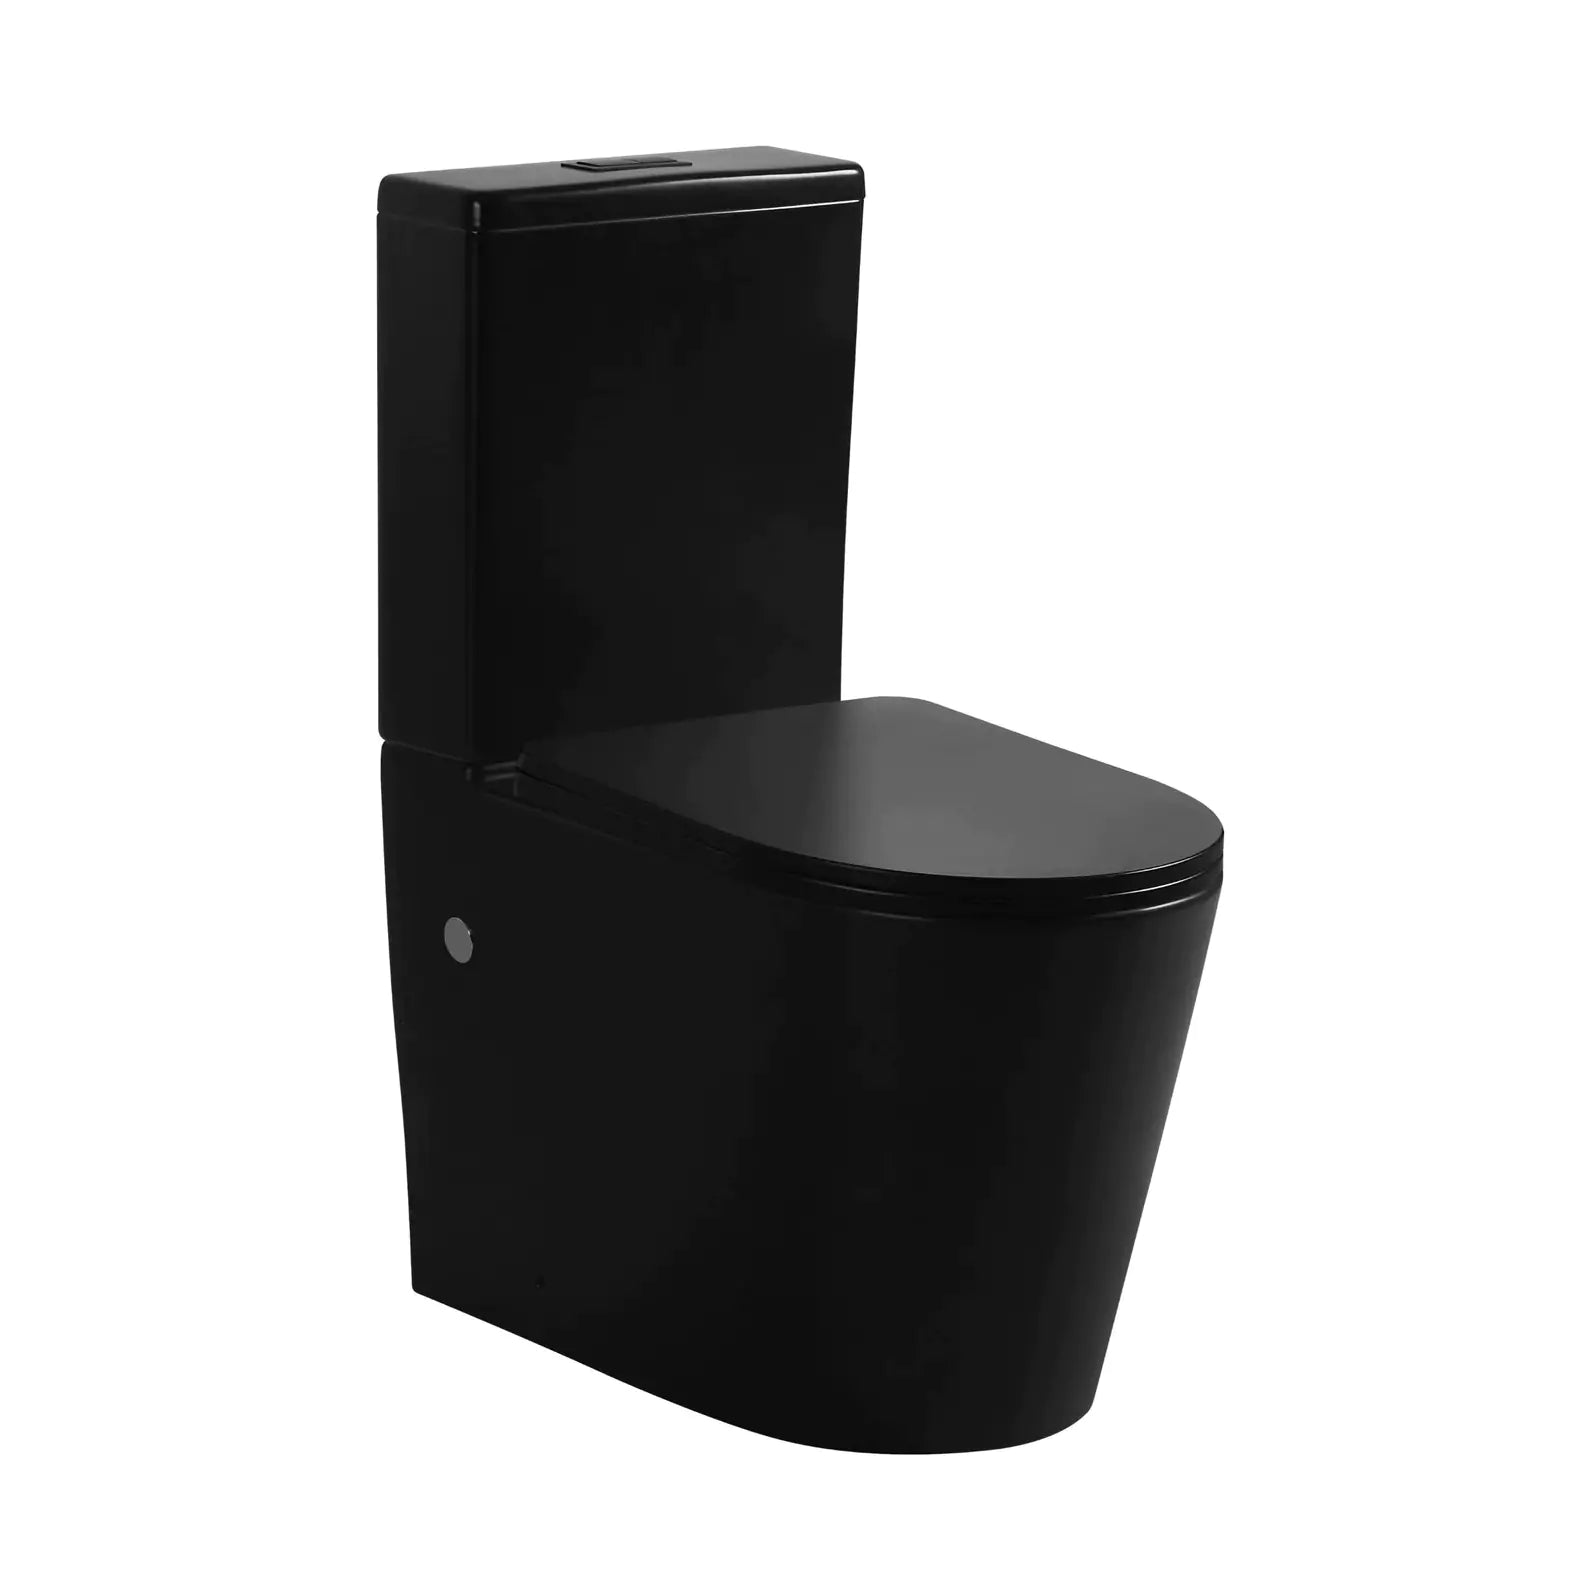 Modern Back To Wall Toilet Suite with Rimless Design-Matte Black-KDK022RC-MB/KDK022RP-MB